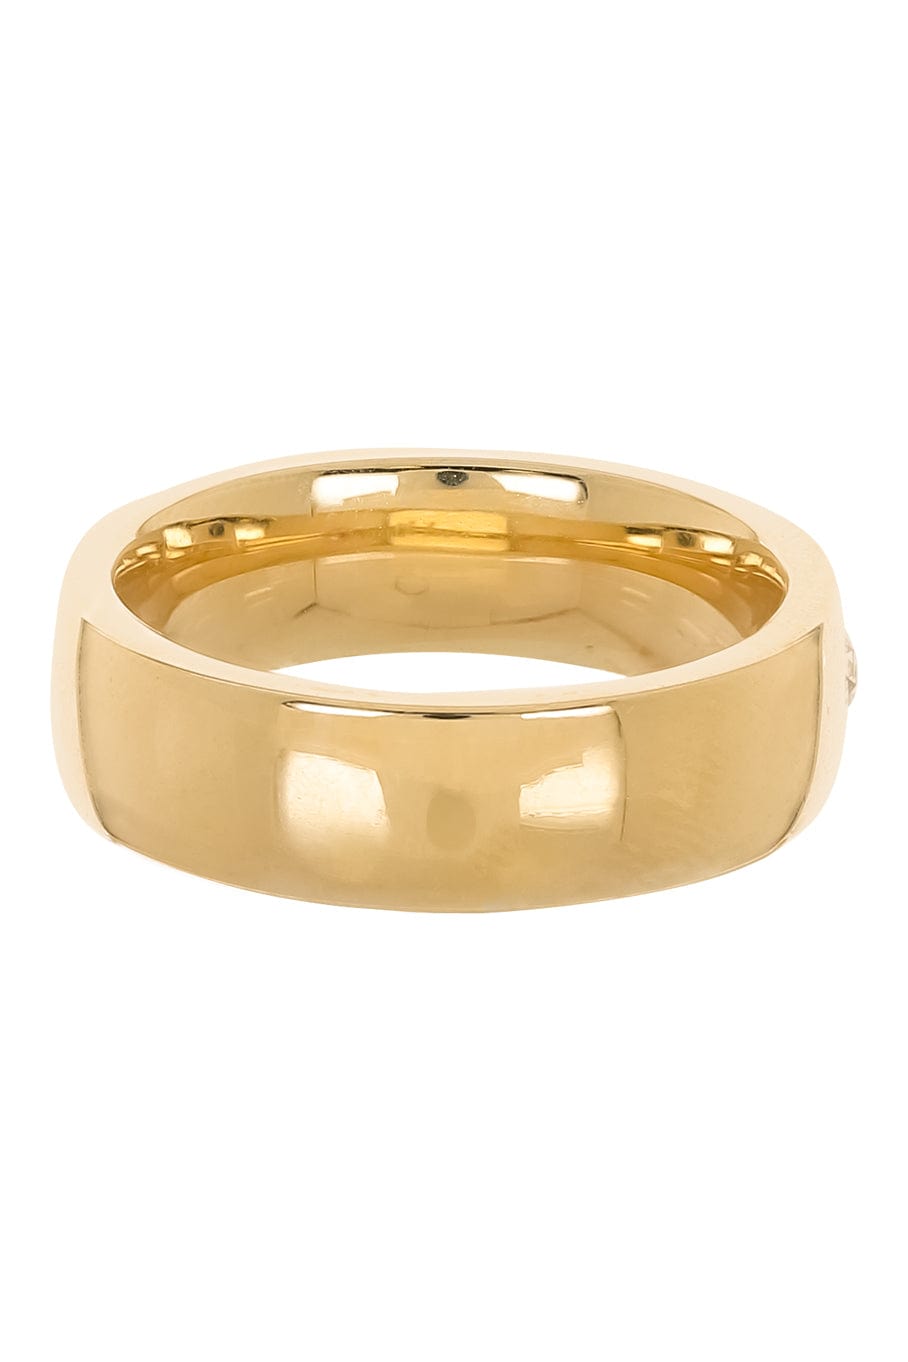 WITH LOVE-Five Diamond Ring-YELLOW GOLD